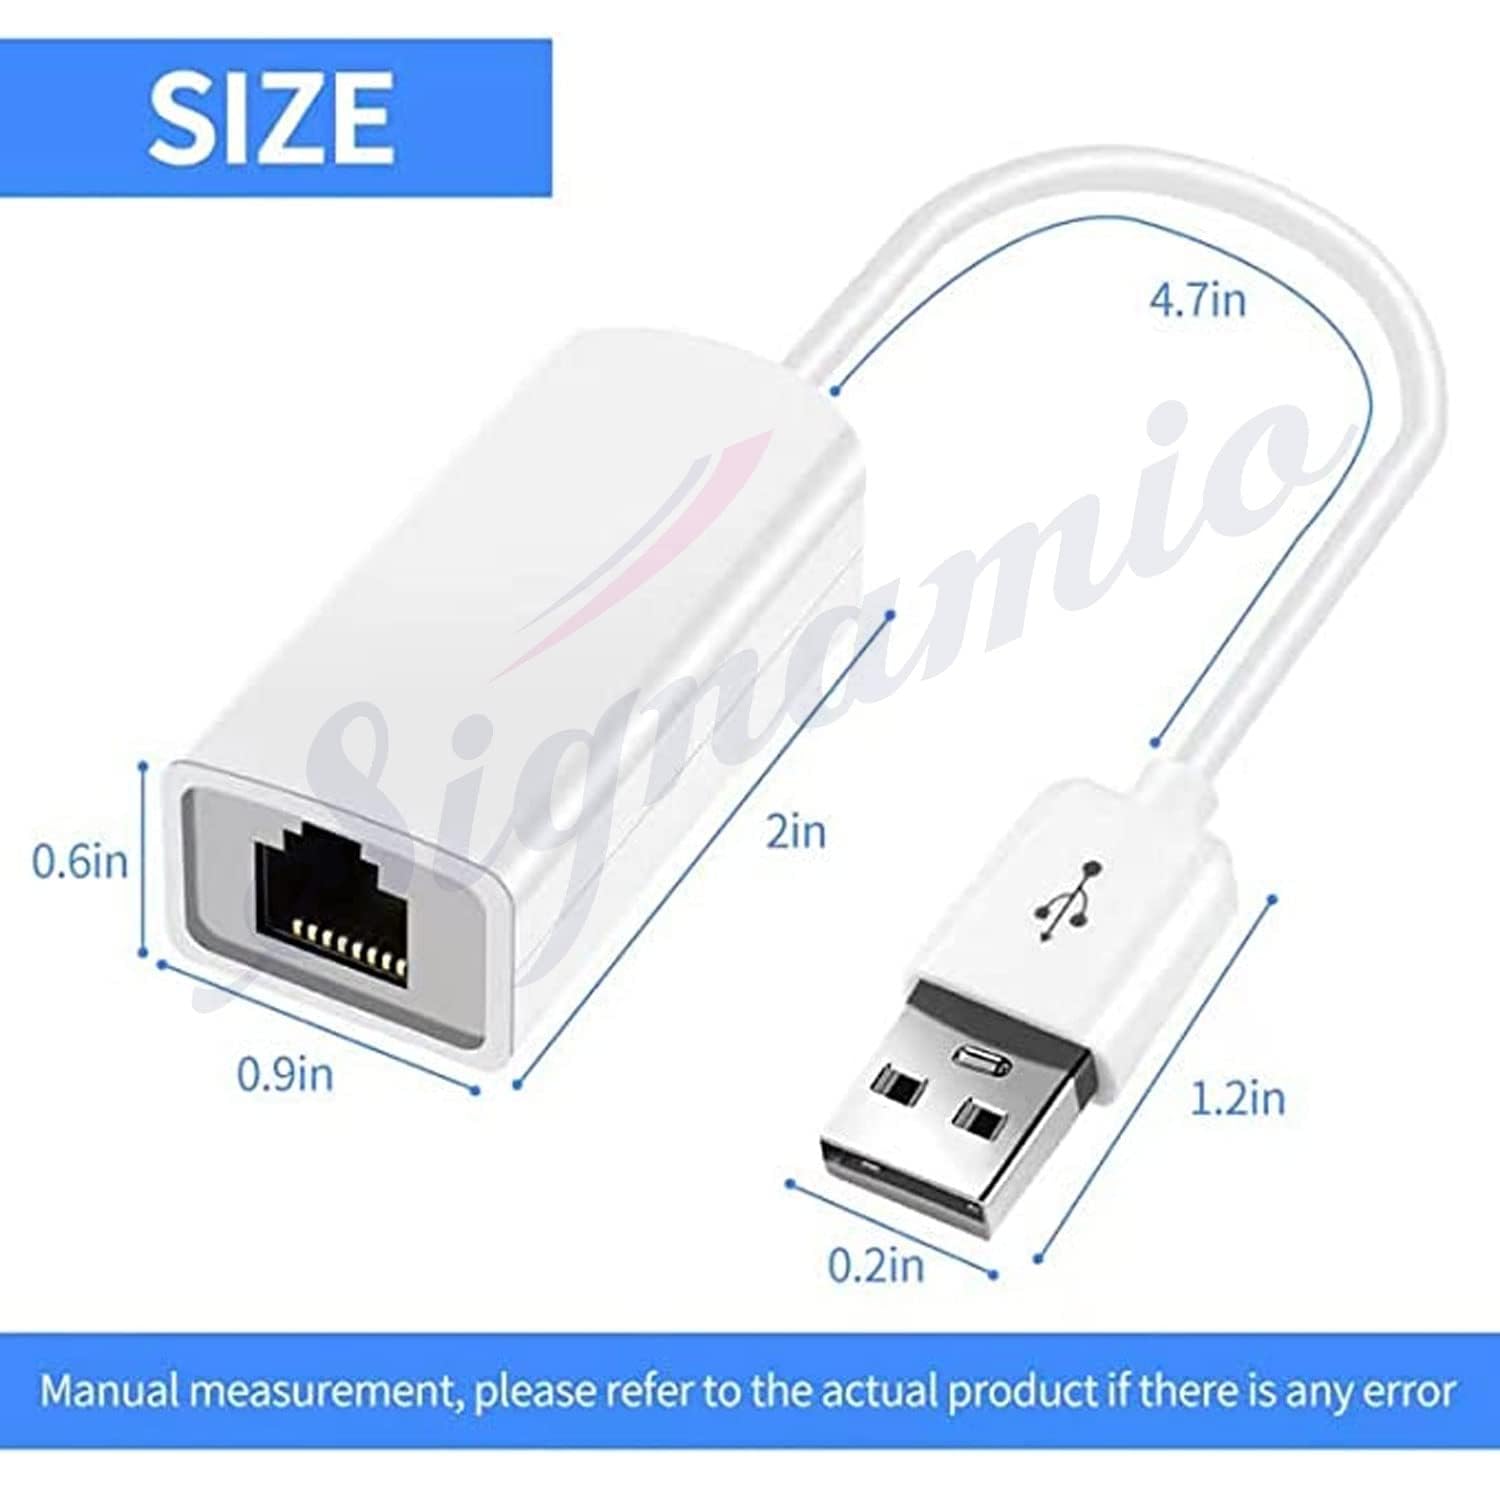 USB to Ethernet Adapter,Foldable USB 2.0 to Gigabit Ethernet LAN Network Adapter,10/100 Mbps LAN Network Adapter (White)